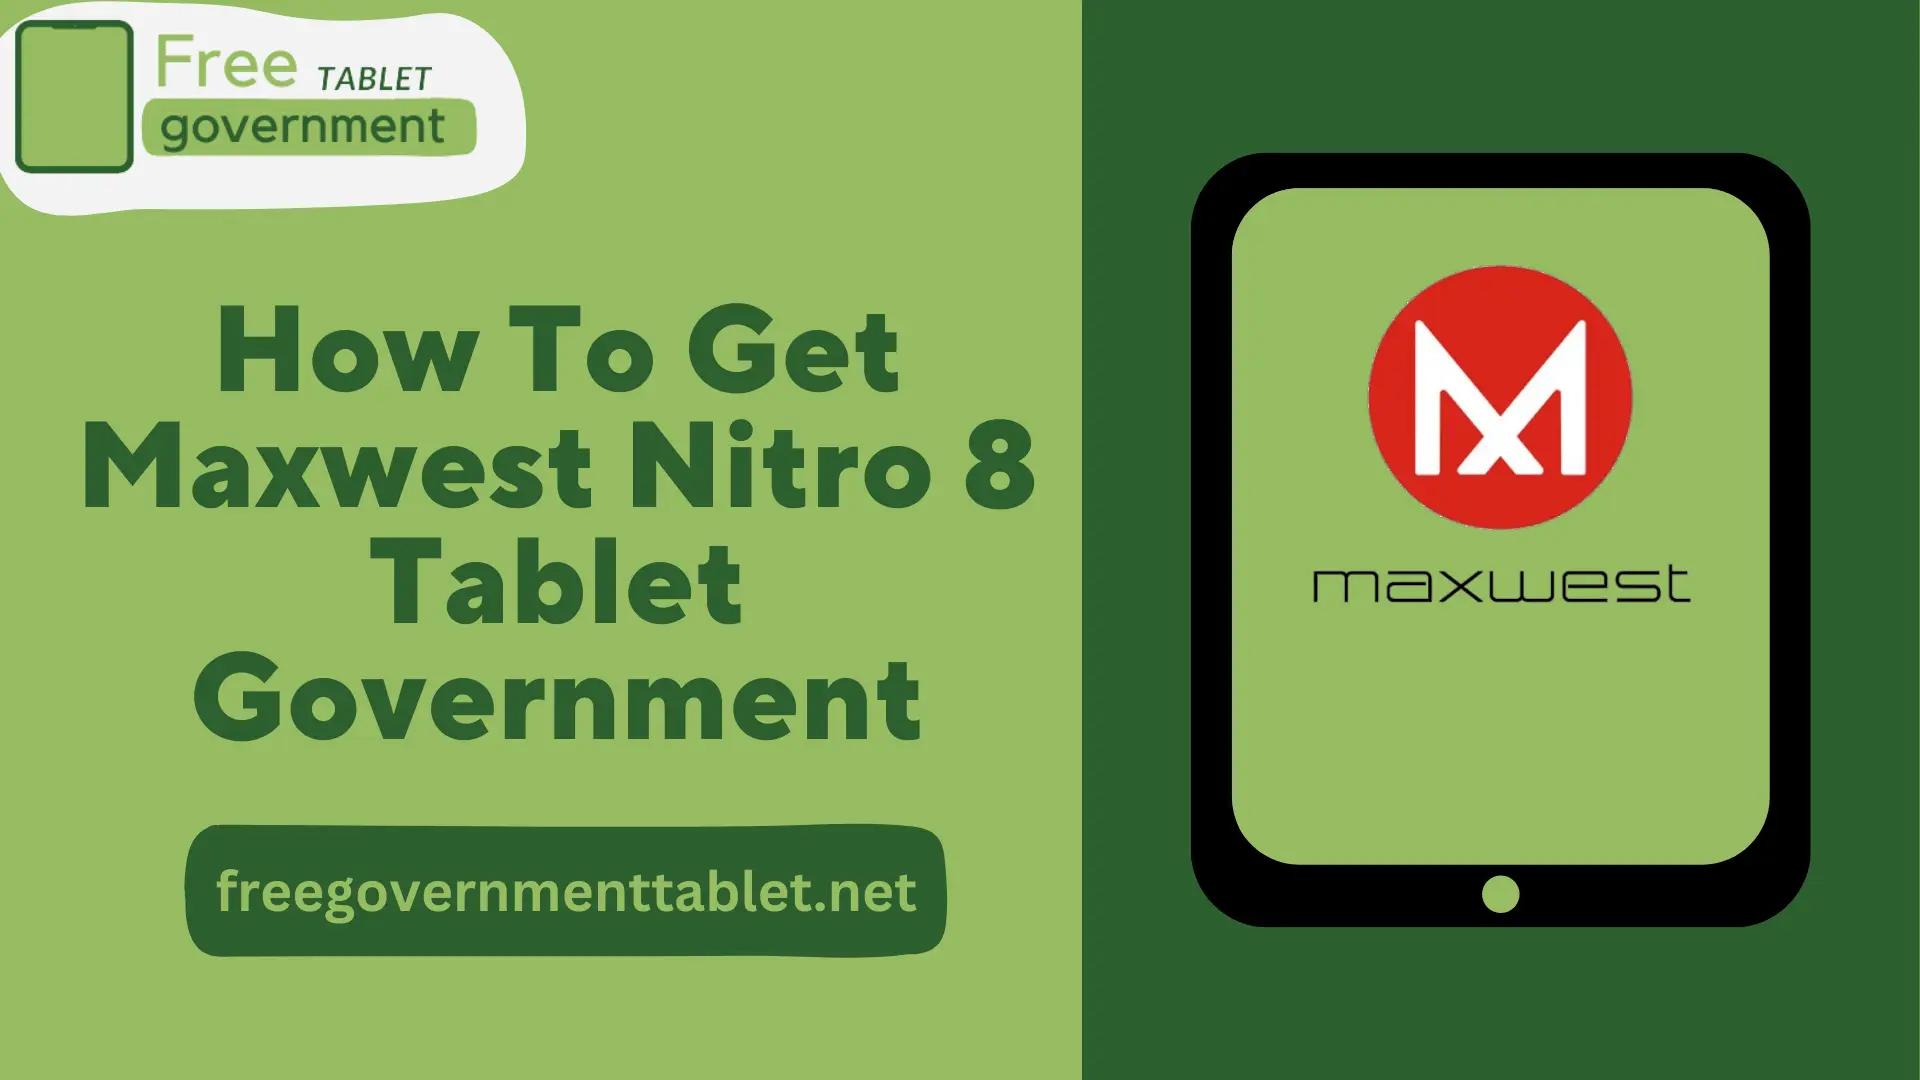 How To Get Maxwest Nitro 8 Tablet Government